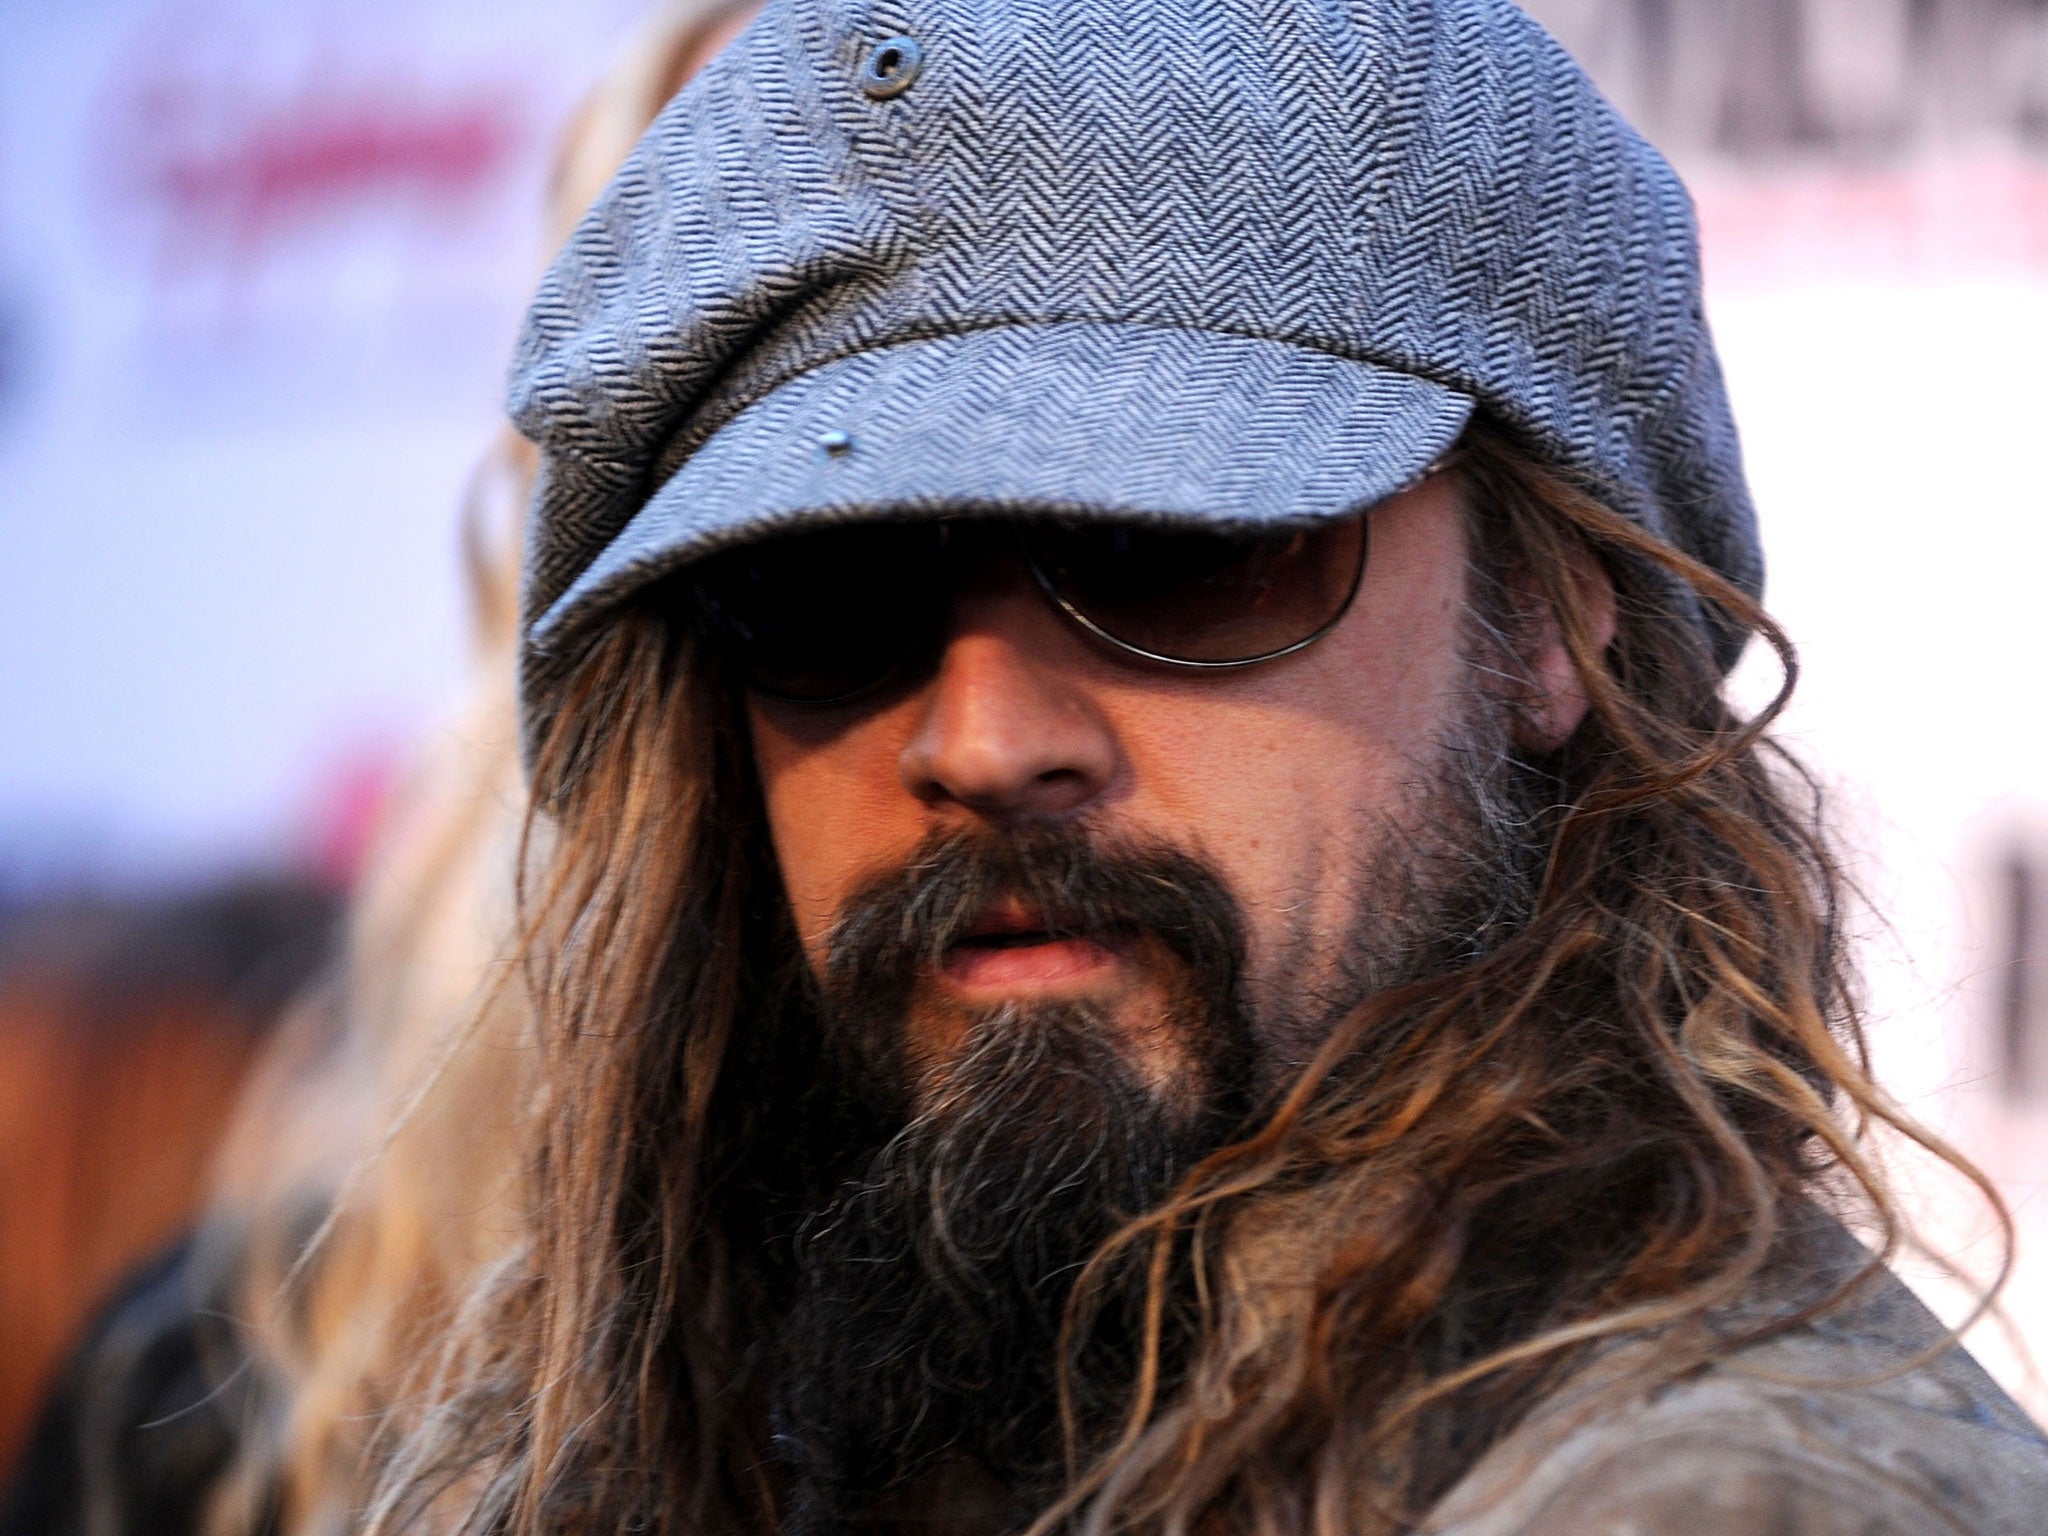 Musician and director Rob Zombie has teamed up with writer Bret Easton Ellis to work on a TV series based on the Manson Murders